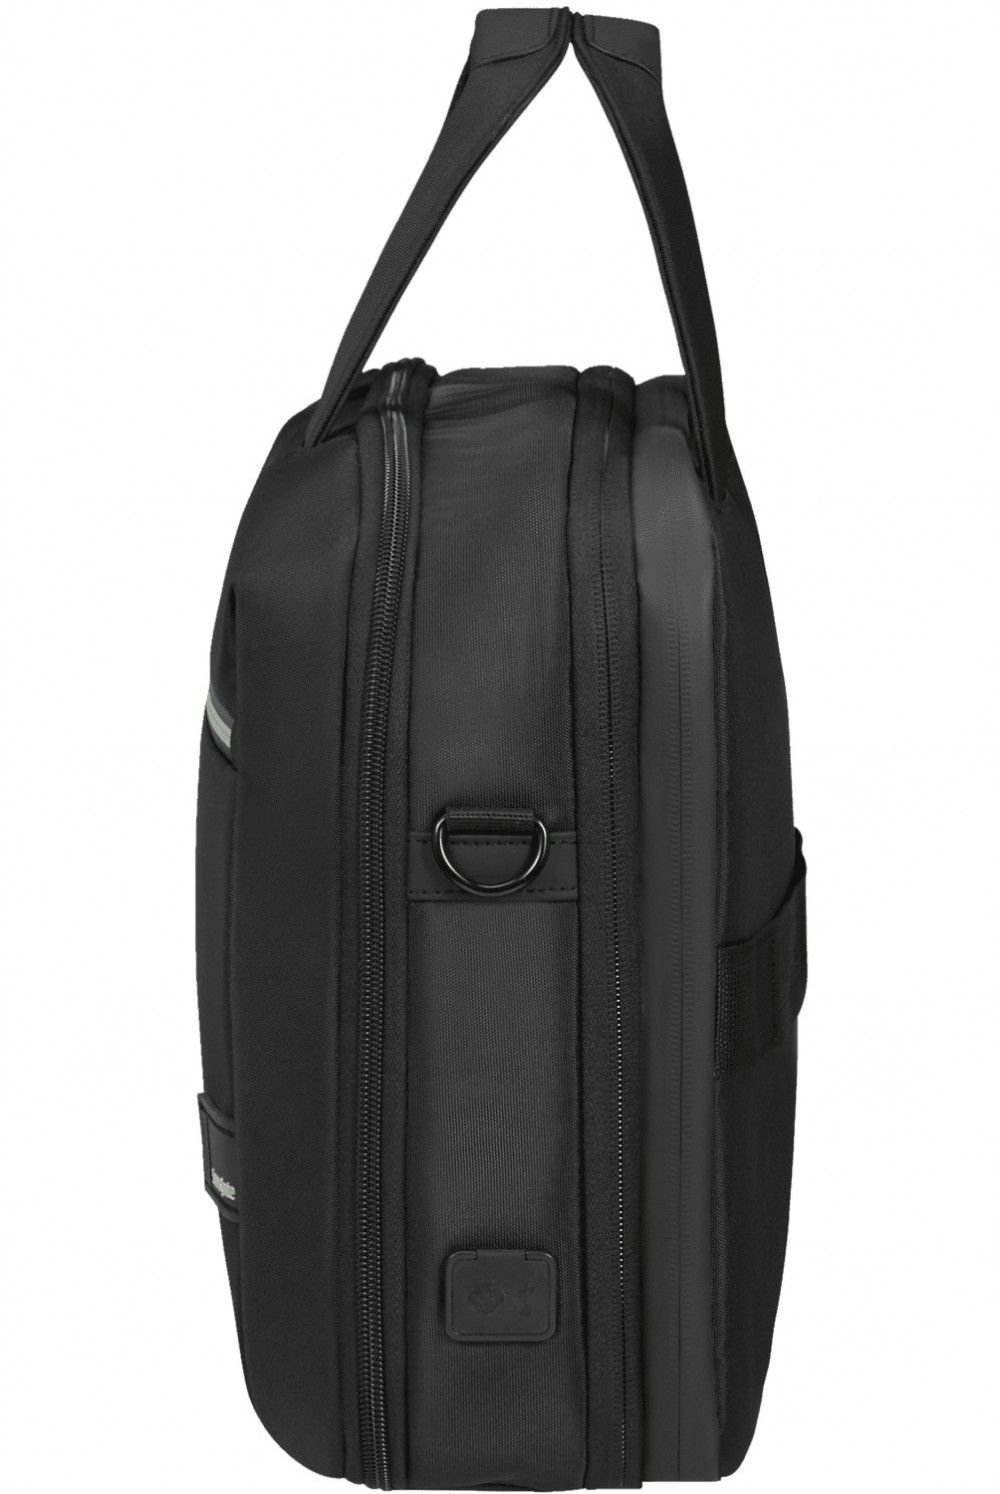 Samsonite Litepoint laptop bags 15.6 inches